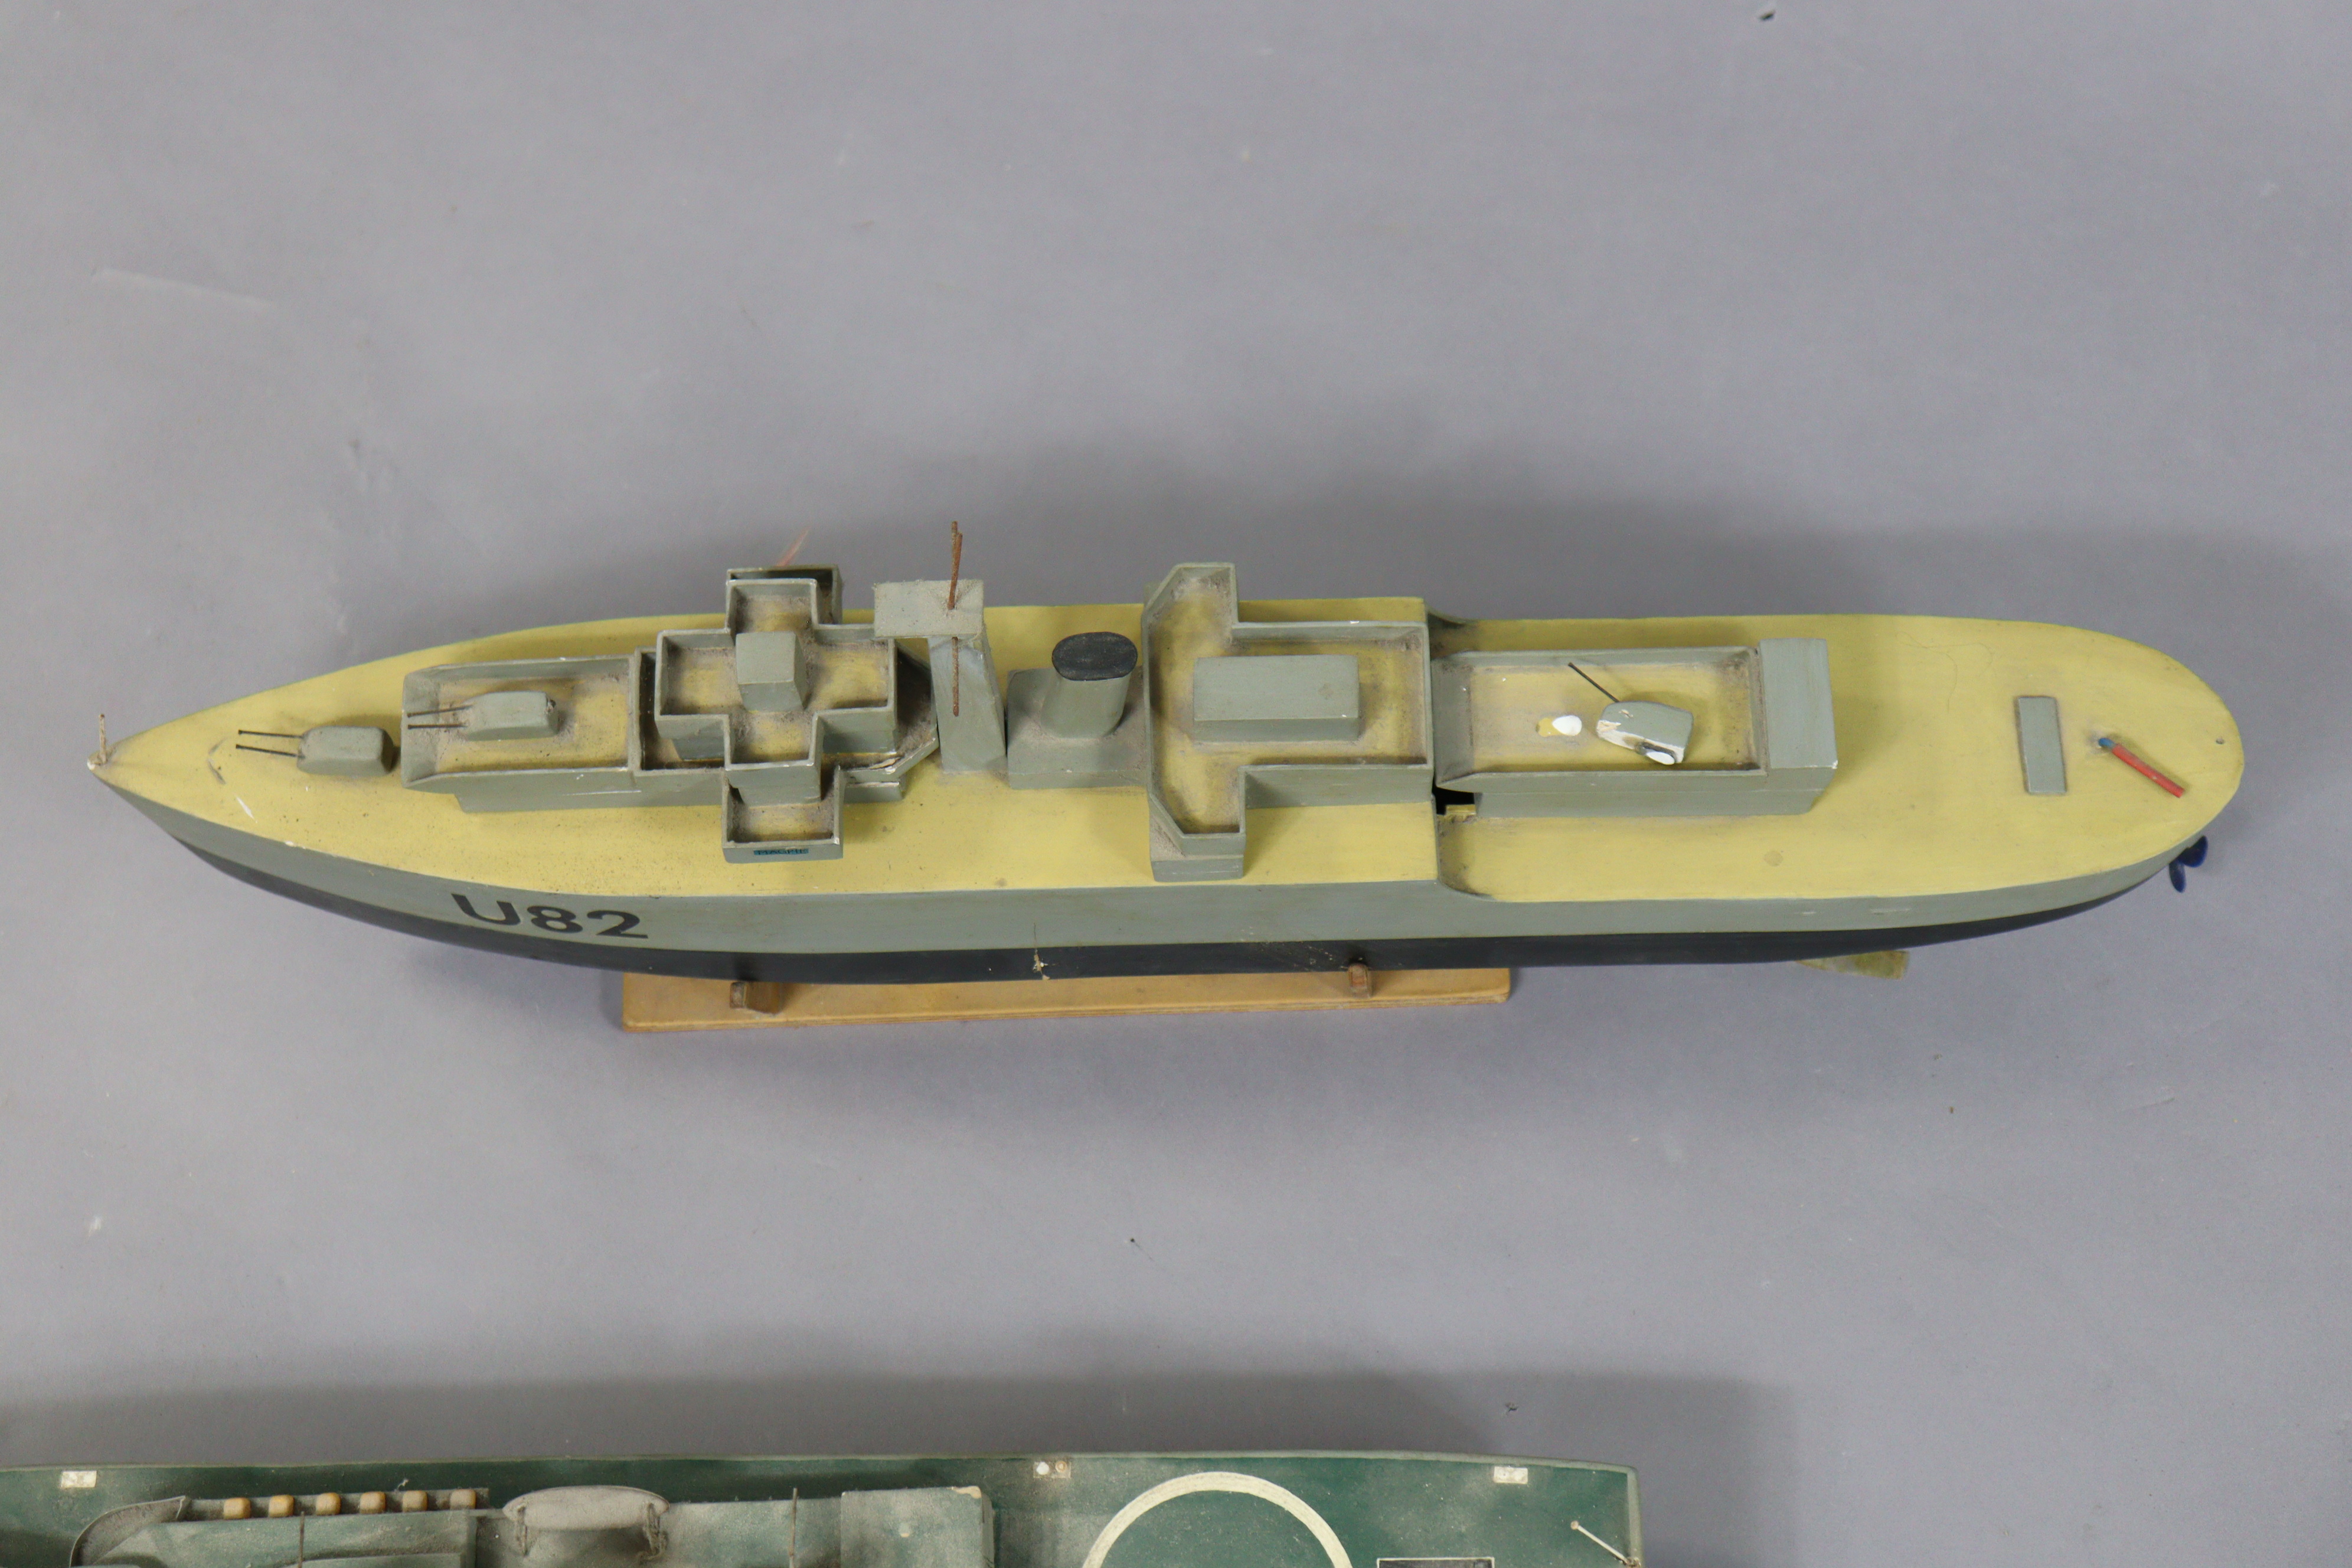 Two painted fibreglass models of warships “F37” 75cm long, and “V82” 70cm long. - Image 3 of 3